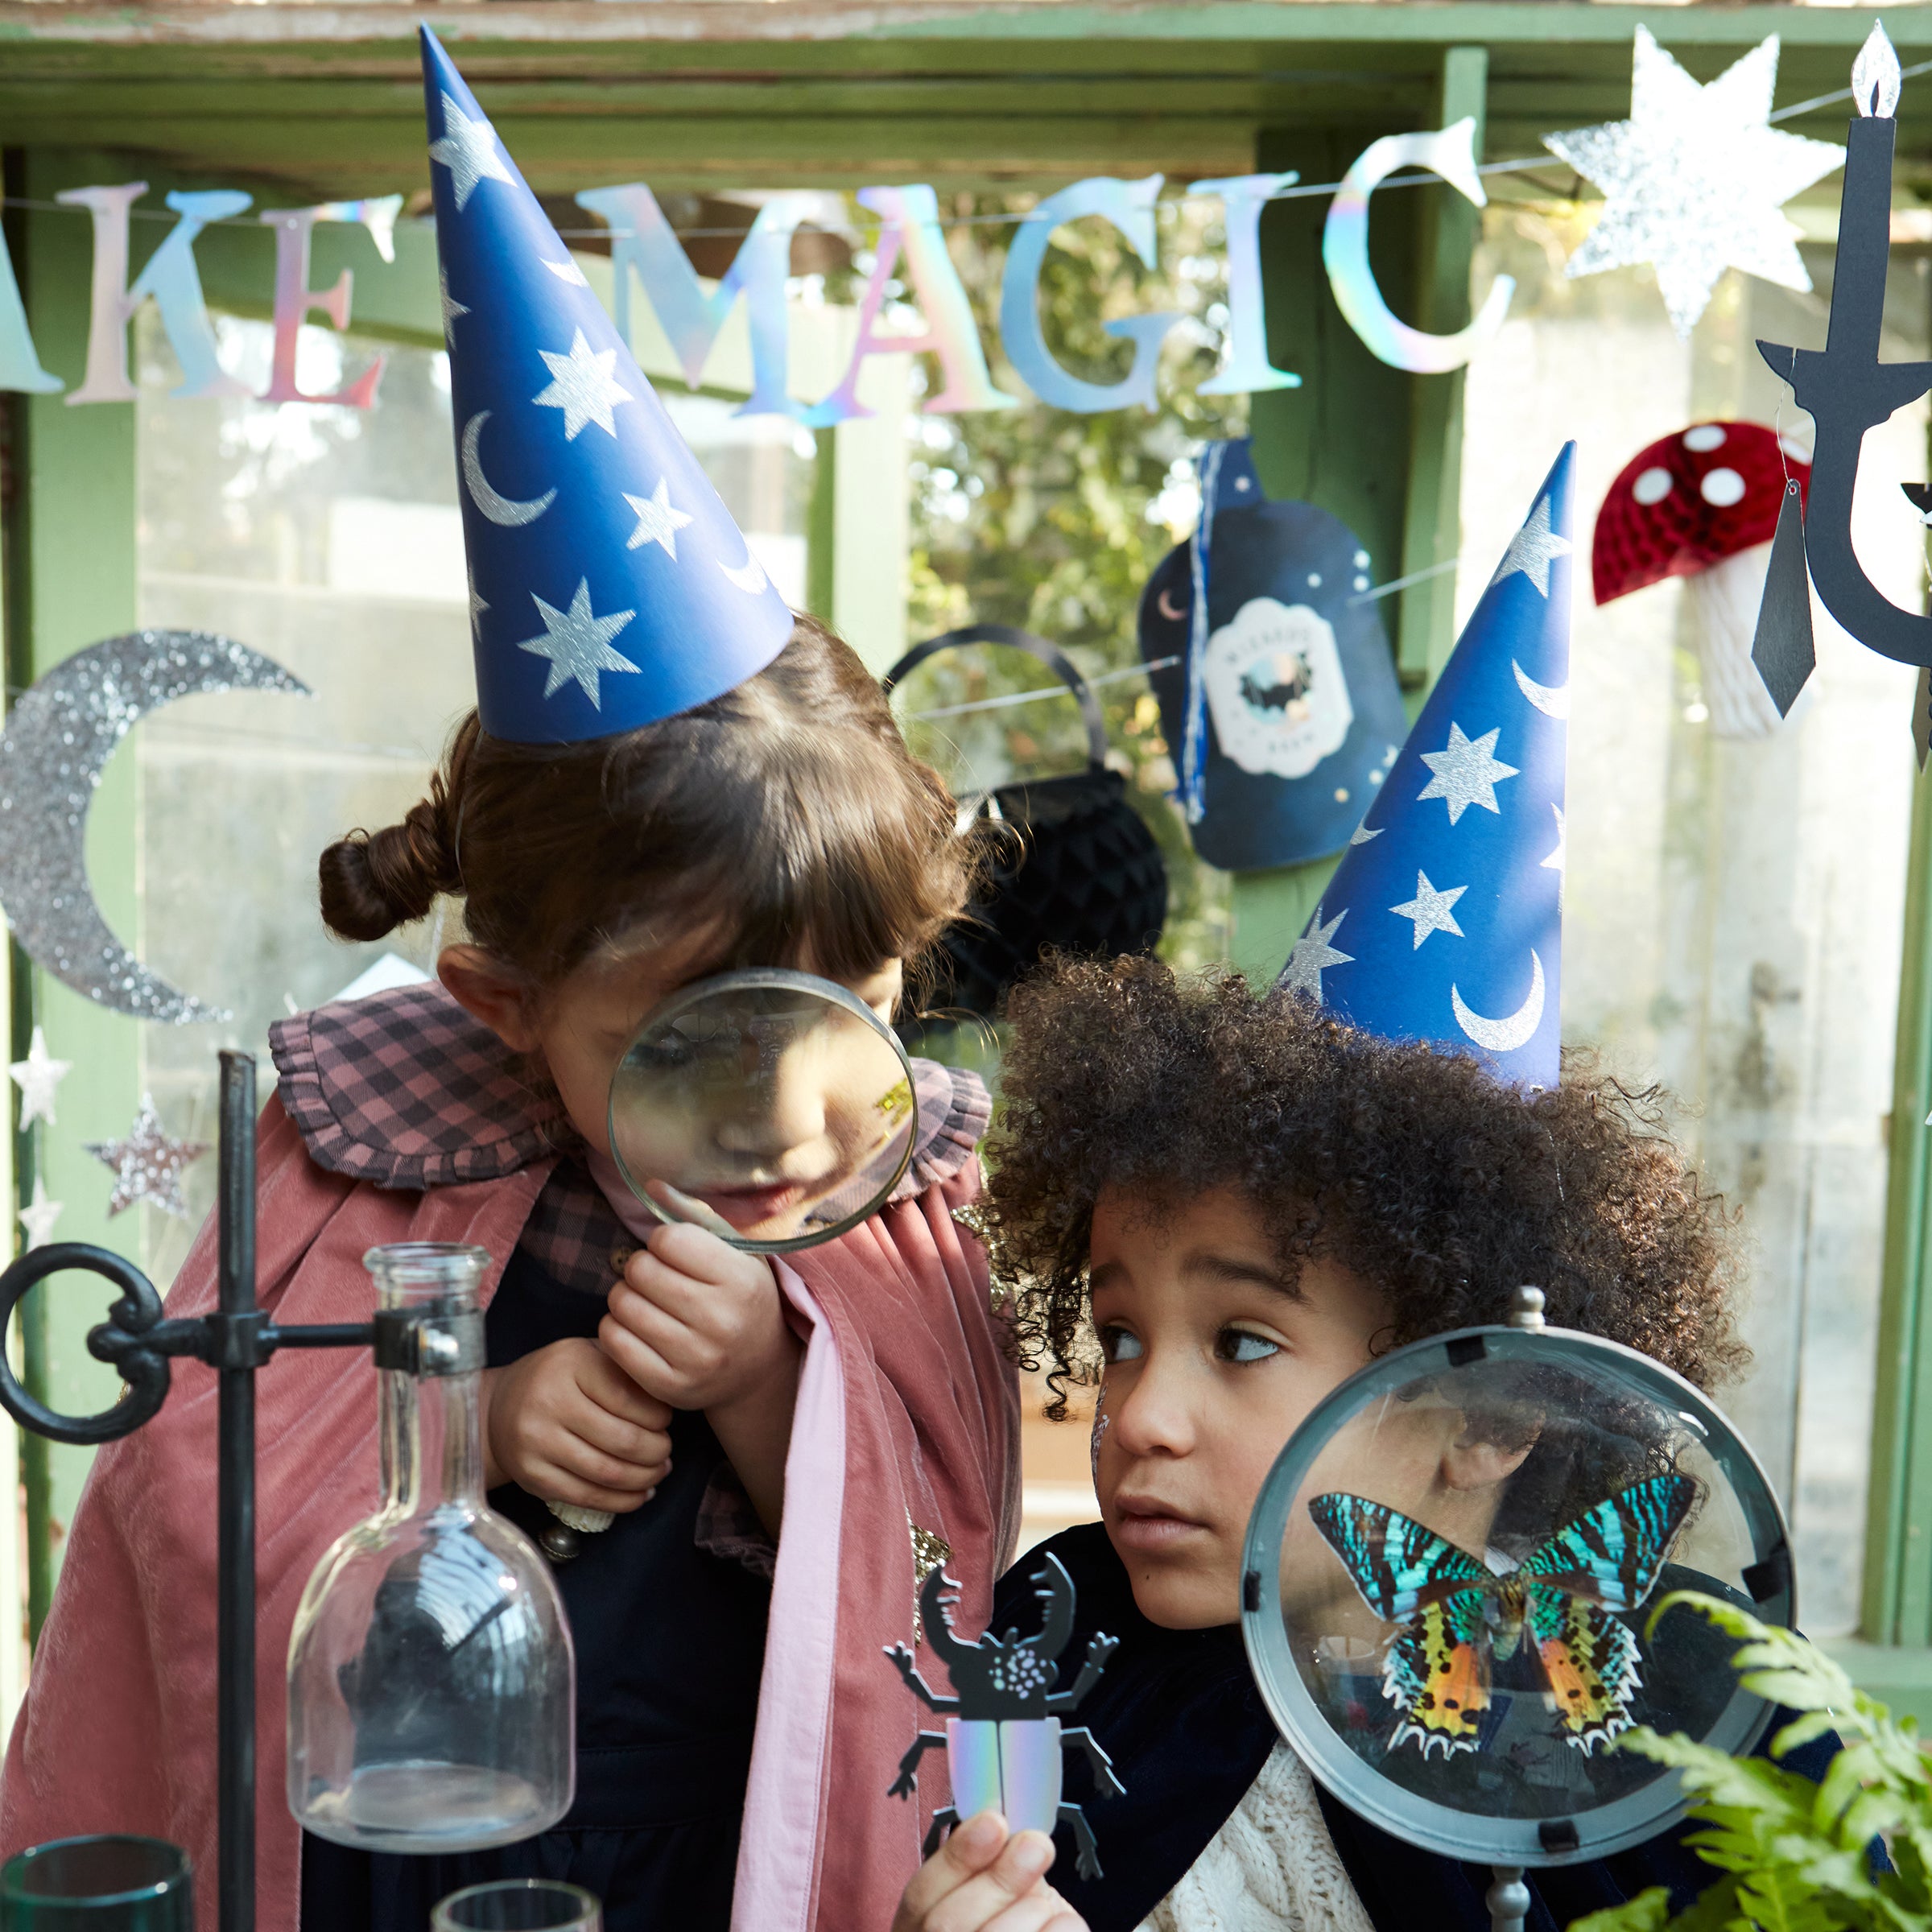 Our blue party hats, in the shape of a wizards hat, match perfectly with our wizard wands.